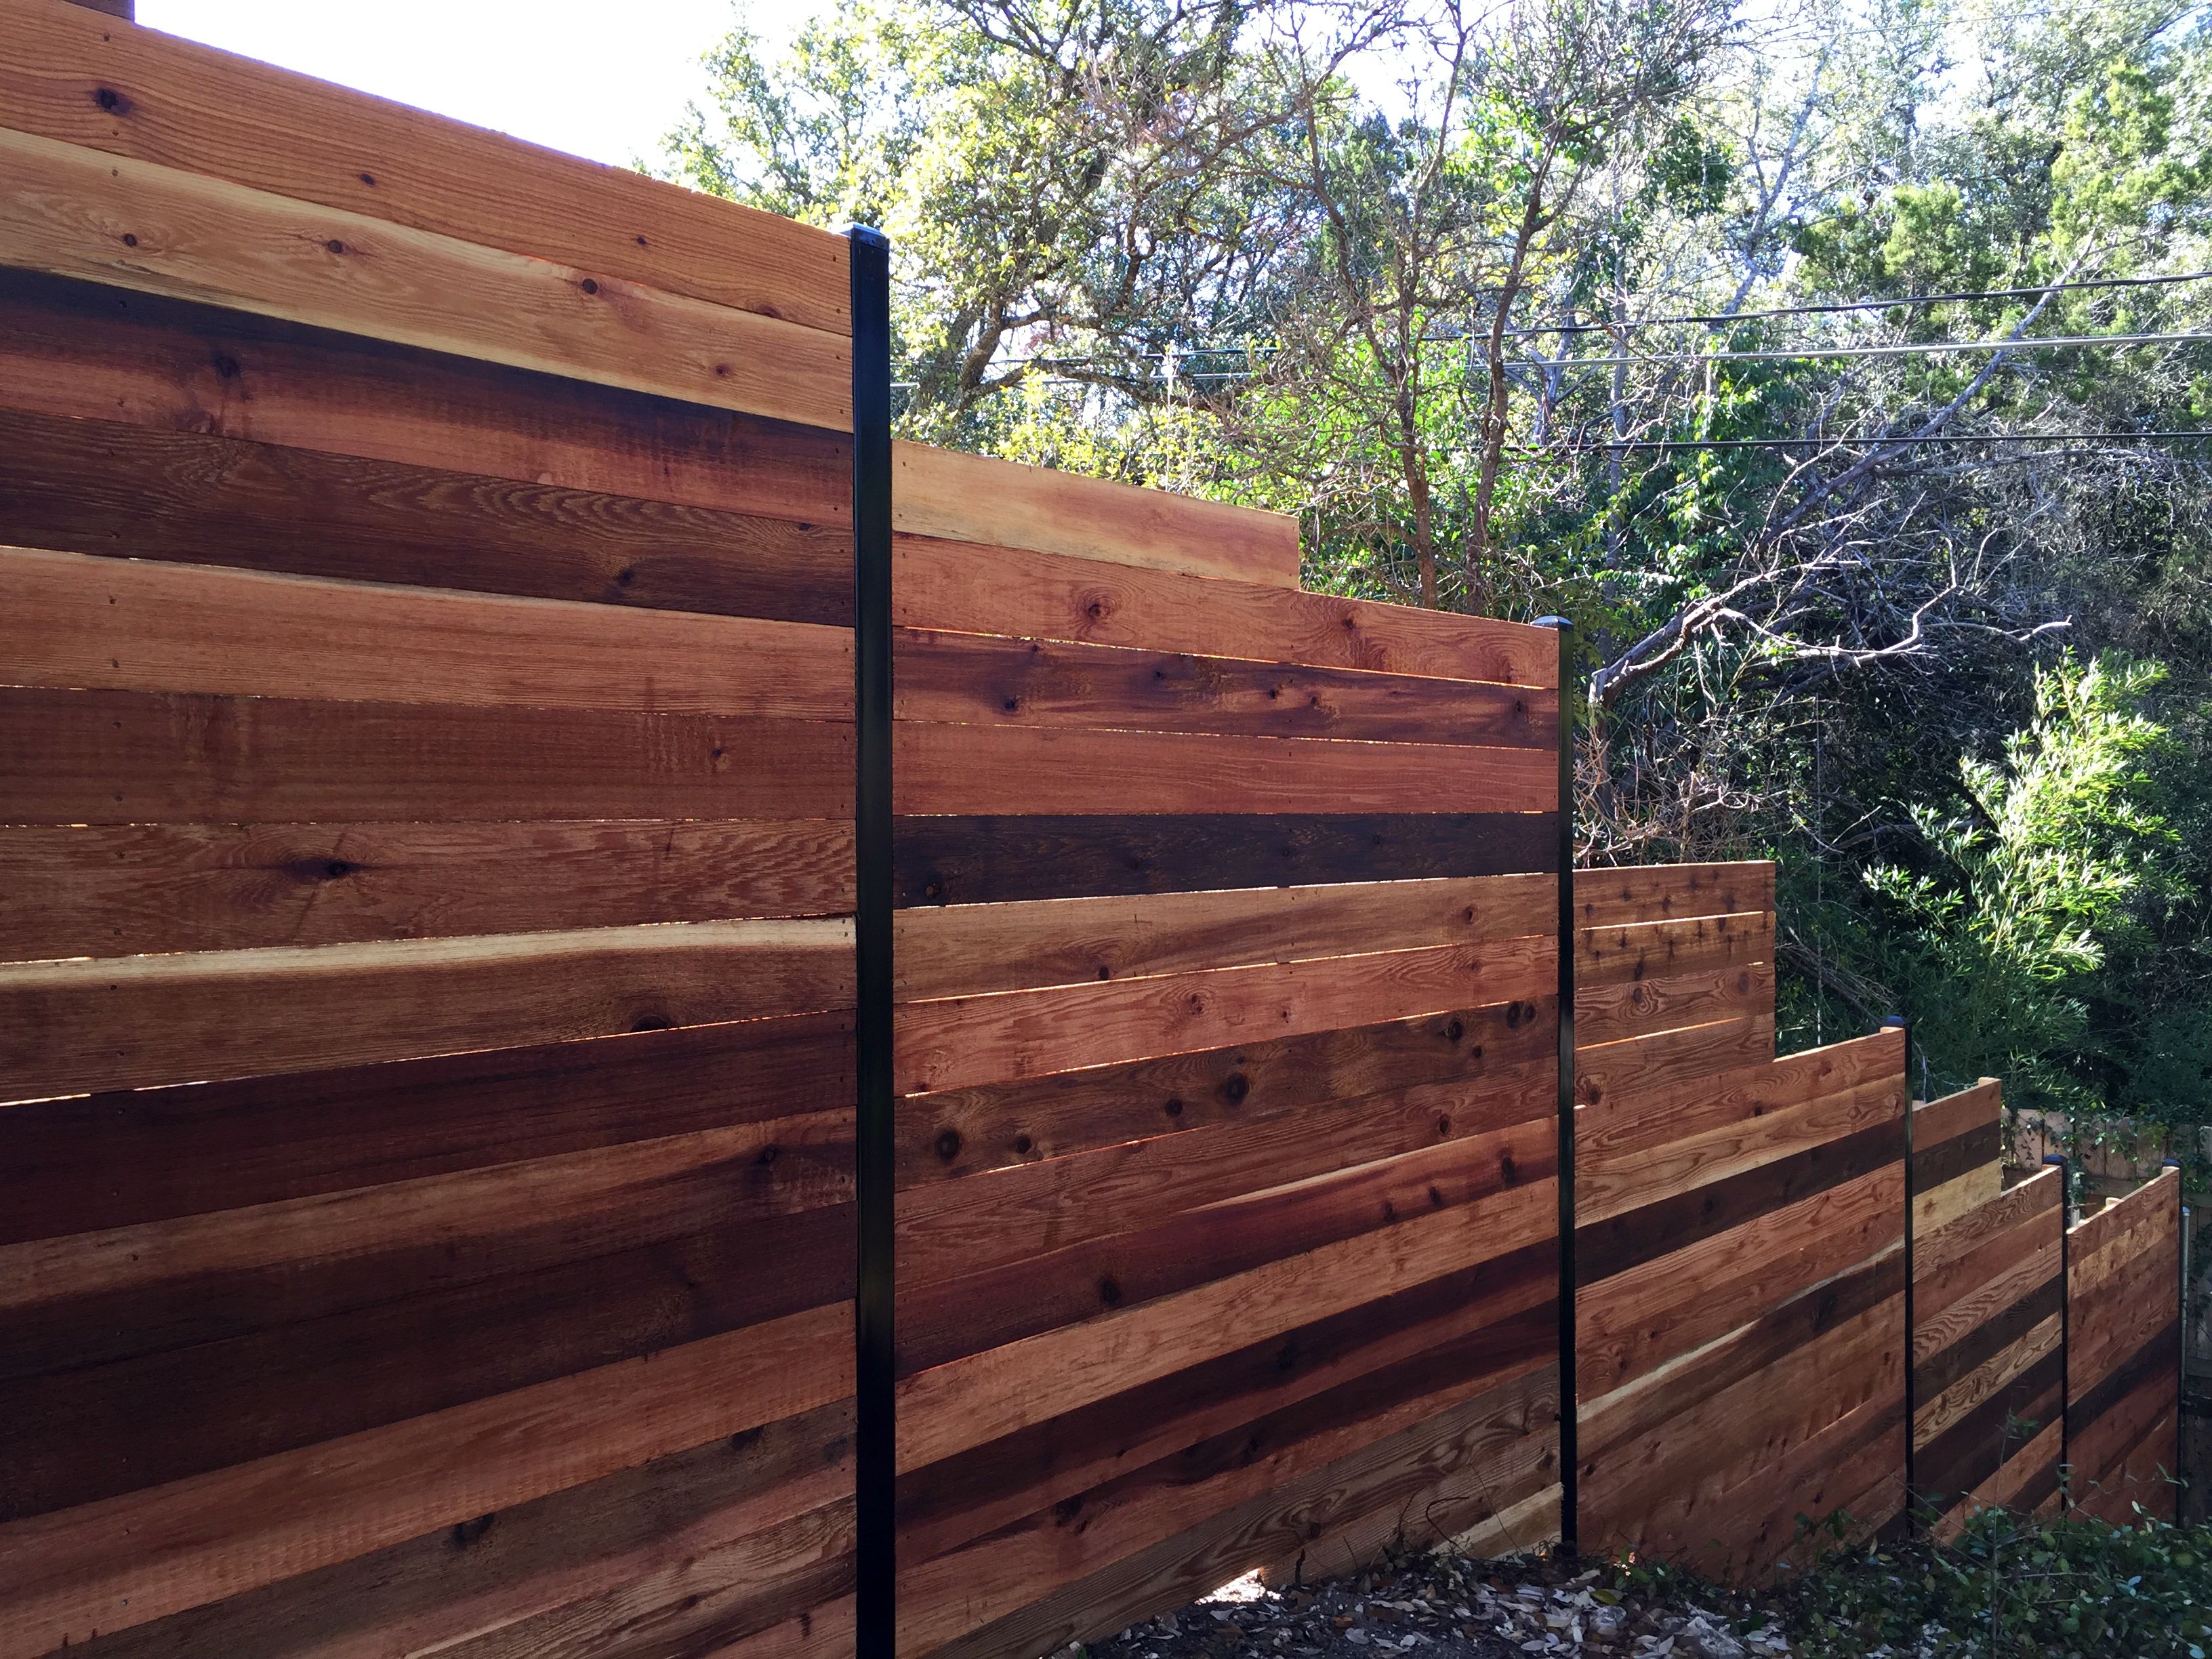 Horizontal Fence With Wood Posts